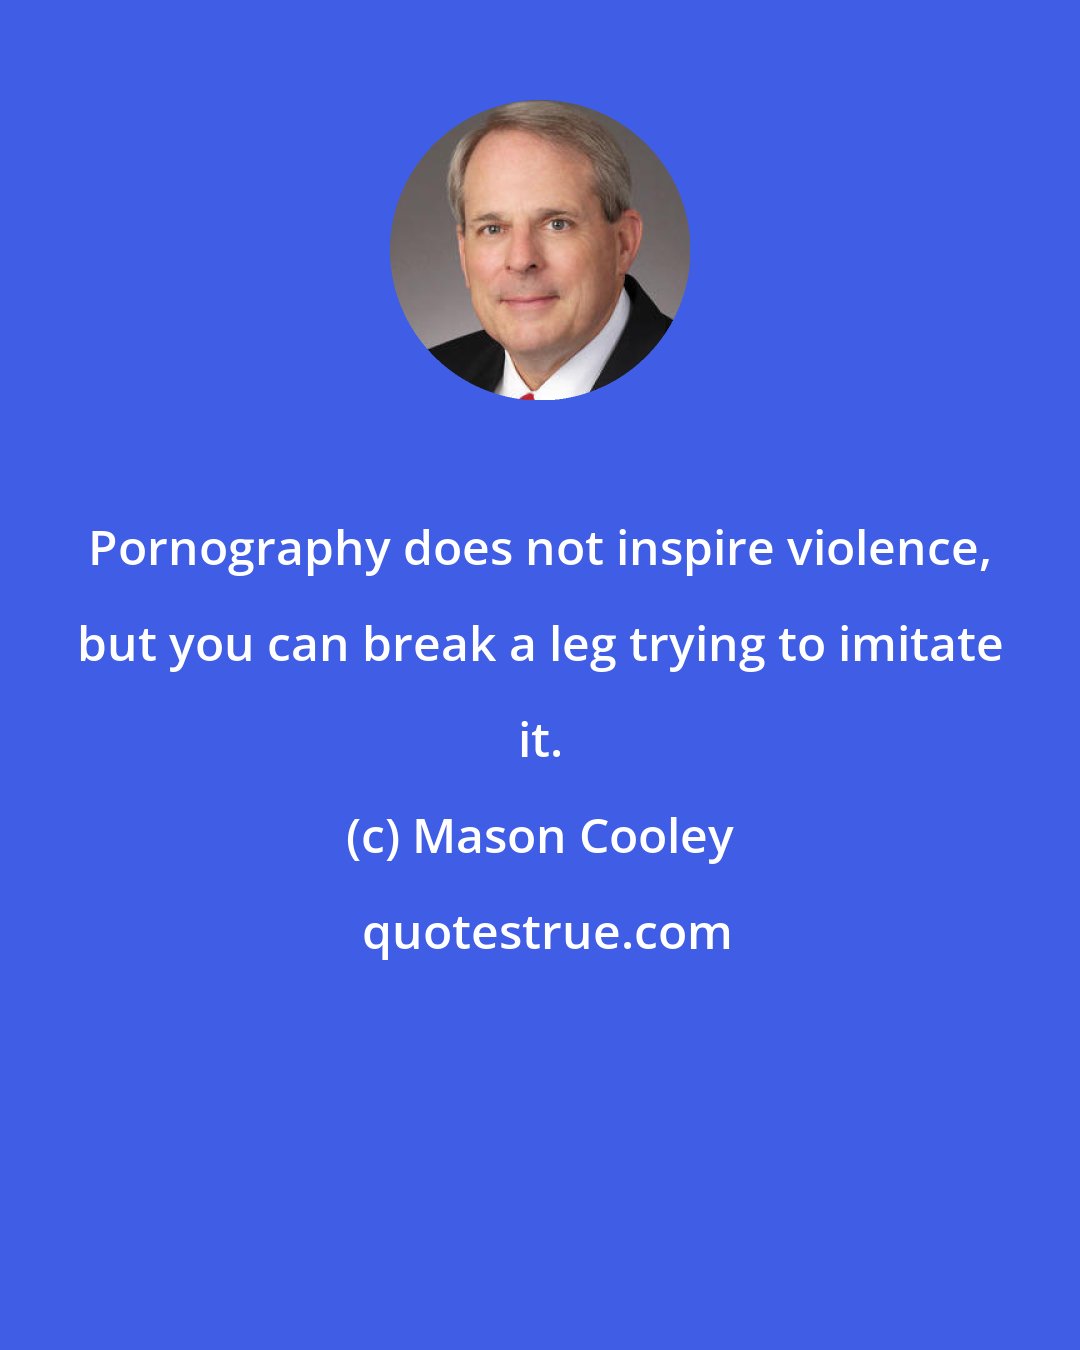 Mason Cooley: Pornography does not inspire violence, but you can break a leg trying to imitate it.